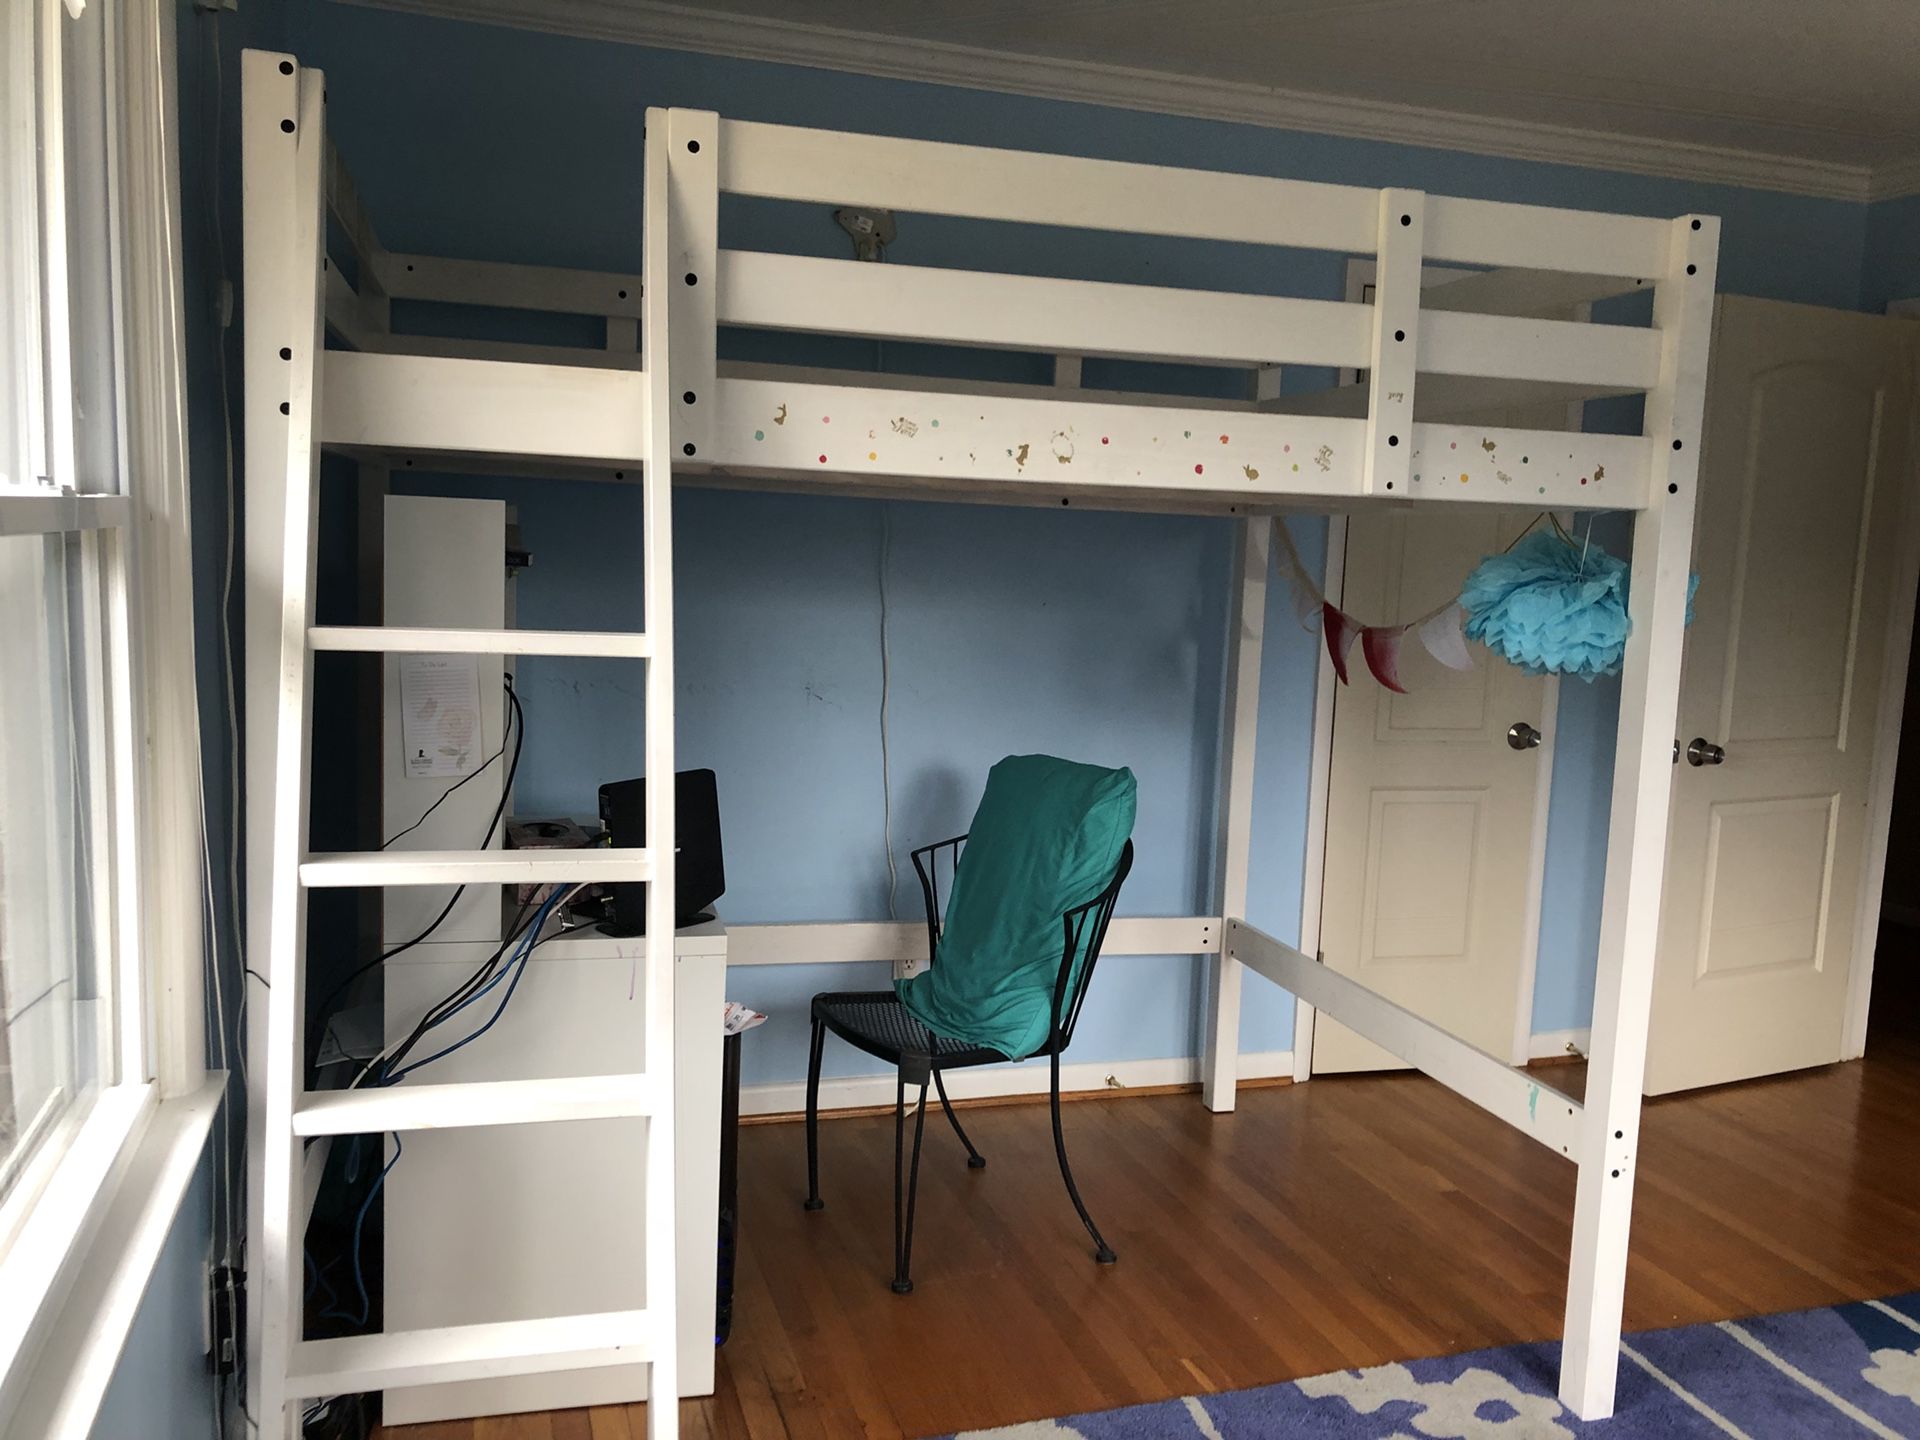 bunk bed for sale